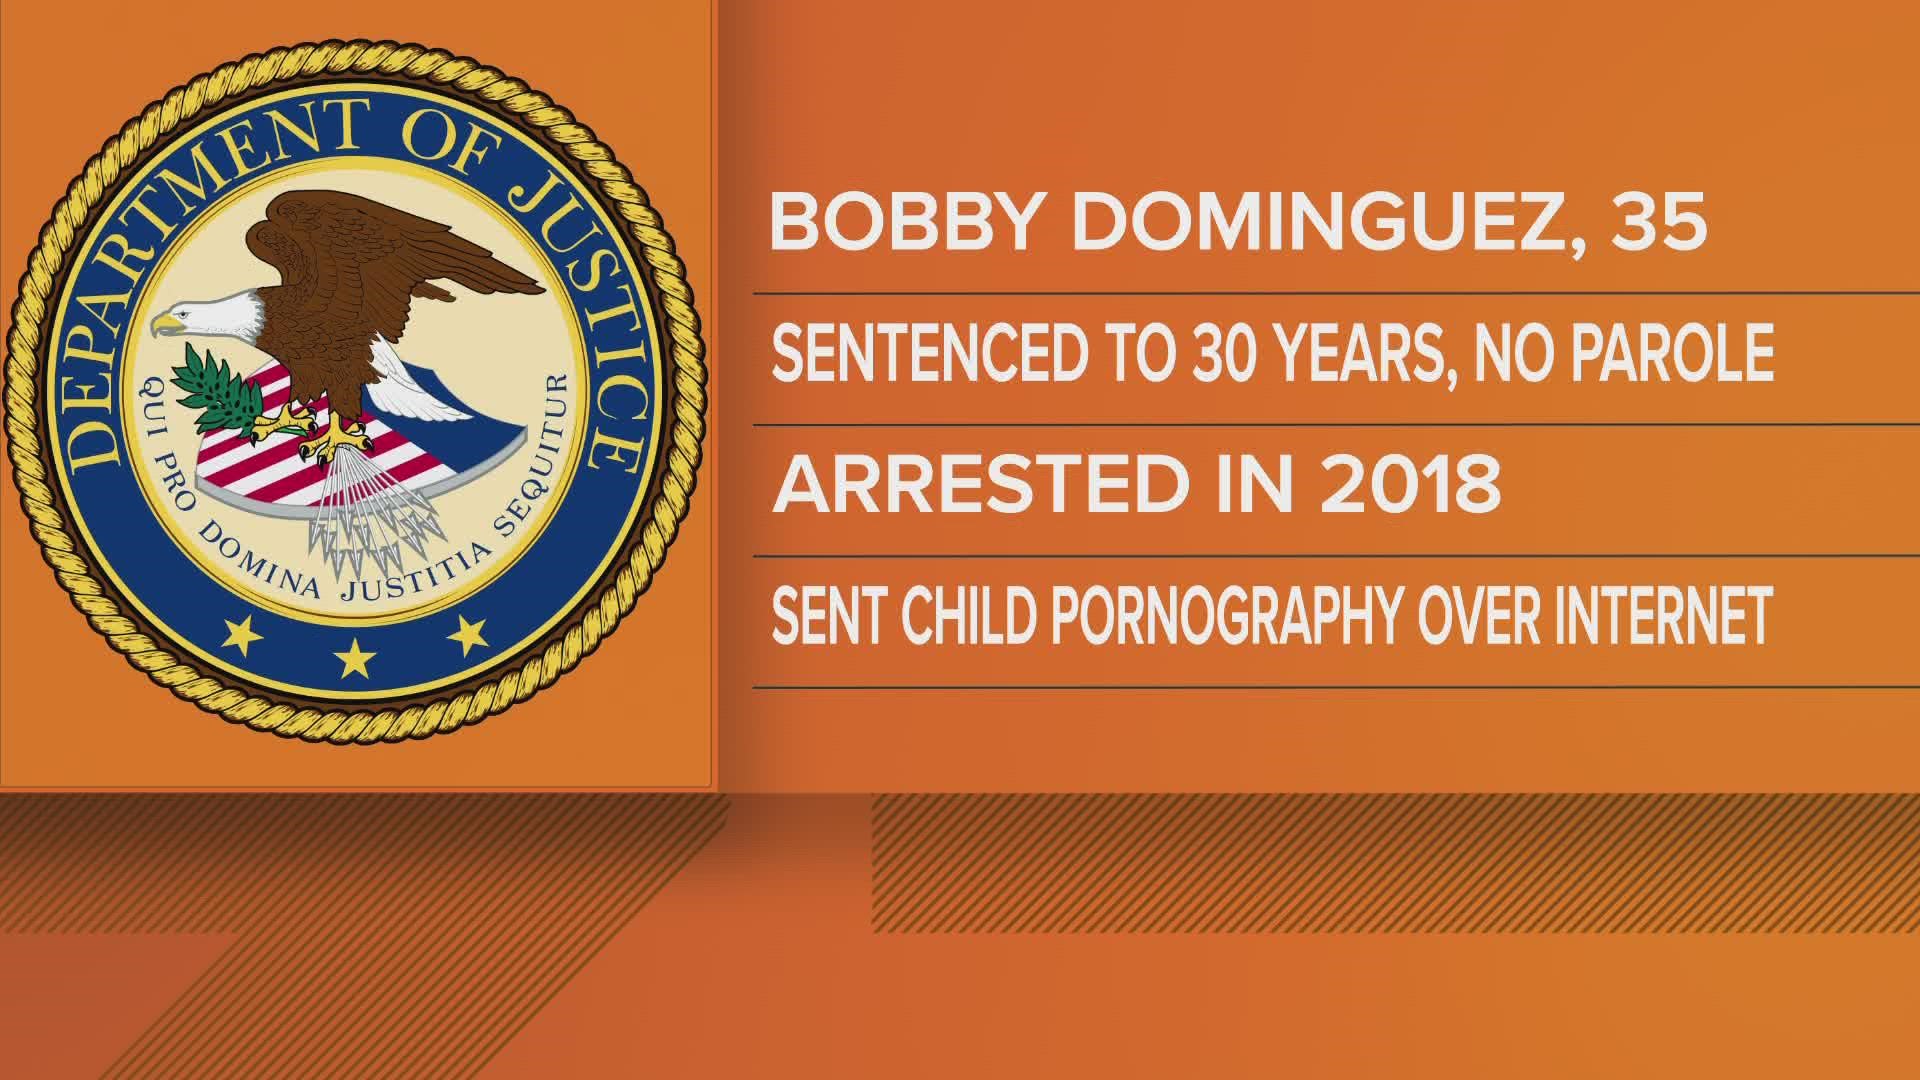 Dominguez produced images of a six-year-old child performing sexual acts and sent those images over the internet, officials say.